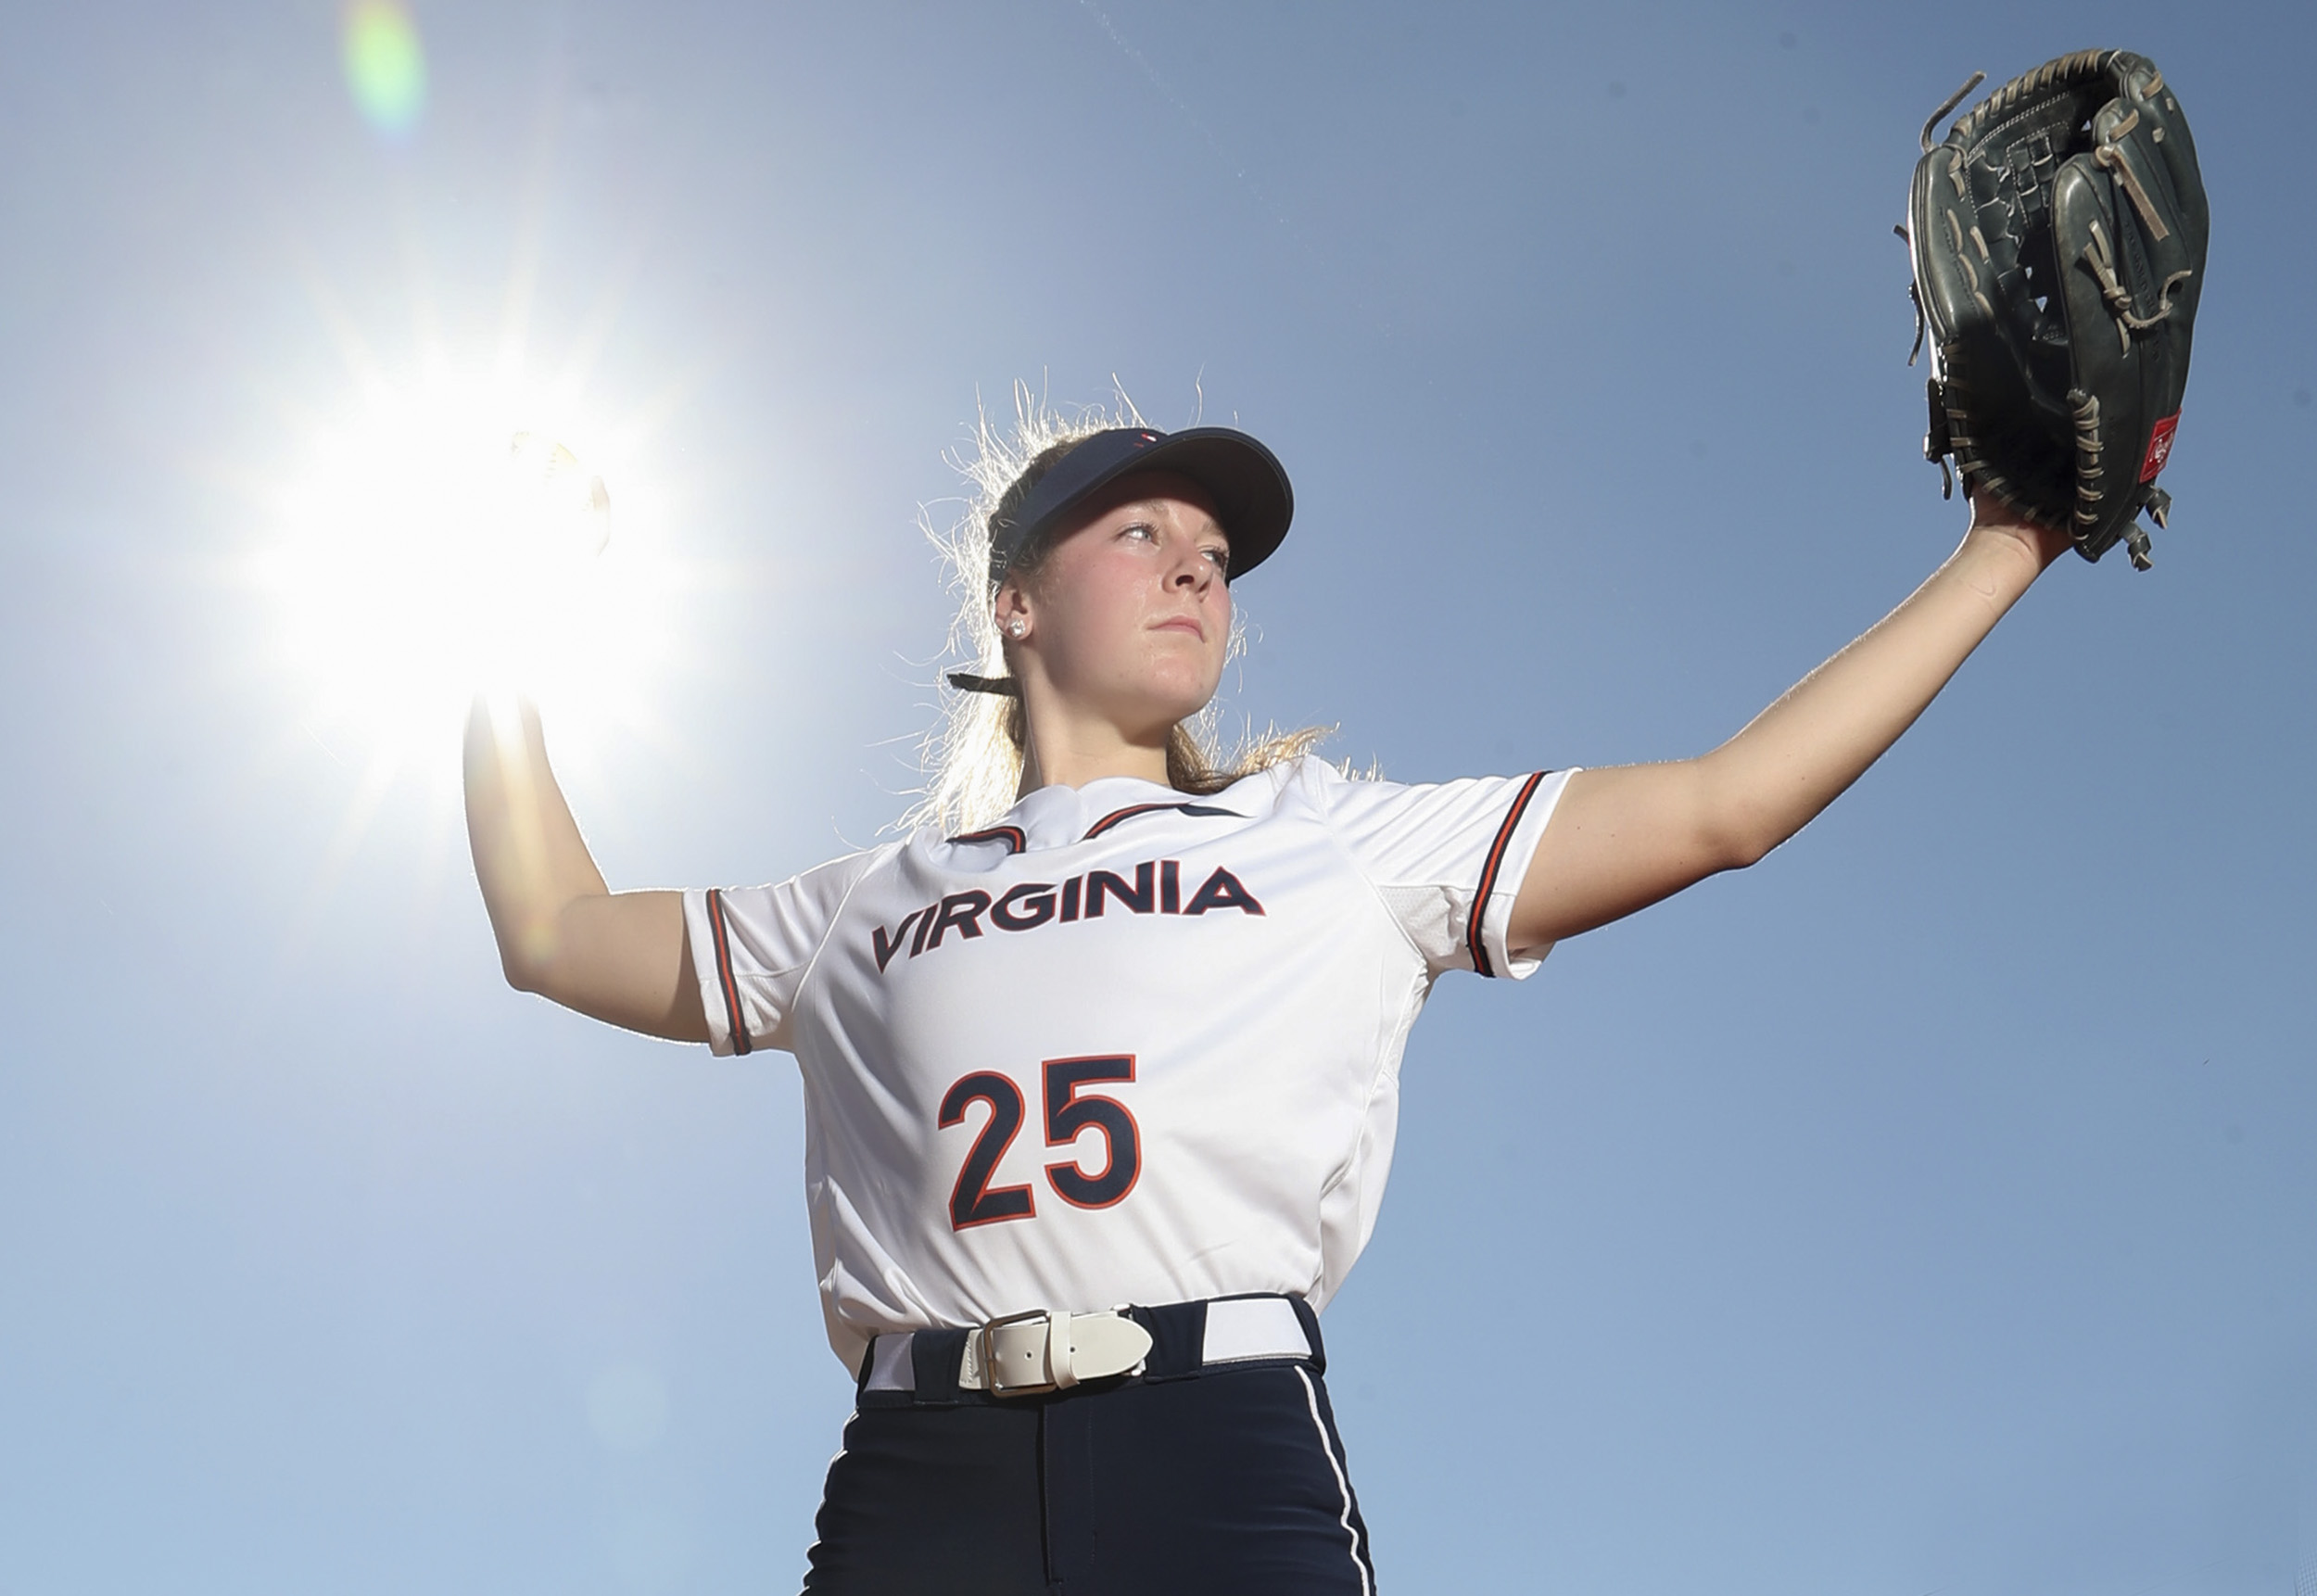 UVA Womans Softball player pitching.  the ball is directly where the sun is in the top left 